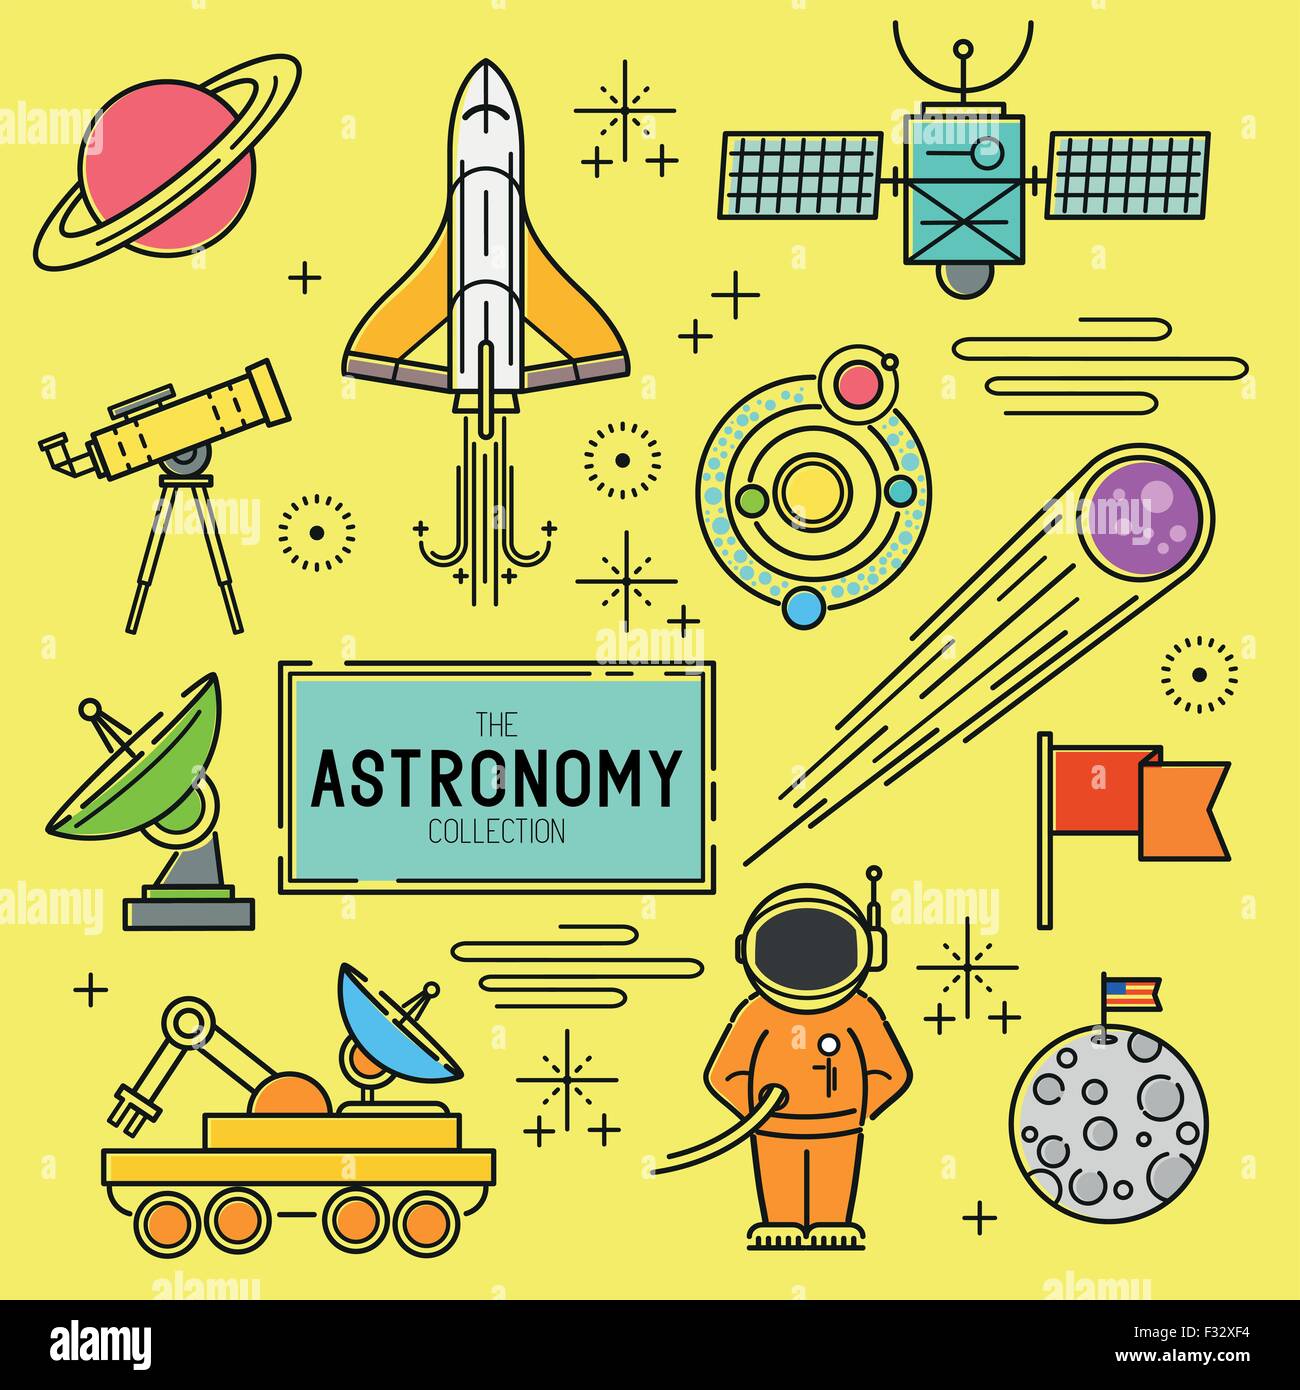 Astronomy Vector Icon Set. A collection of space themed line icons including a planet, rocket, spaceman and solar system. Stock Vector